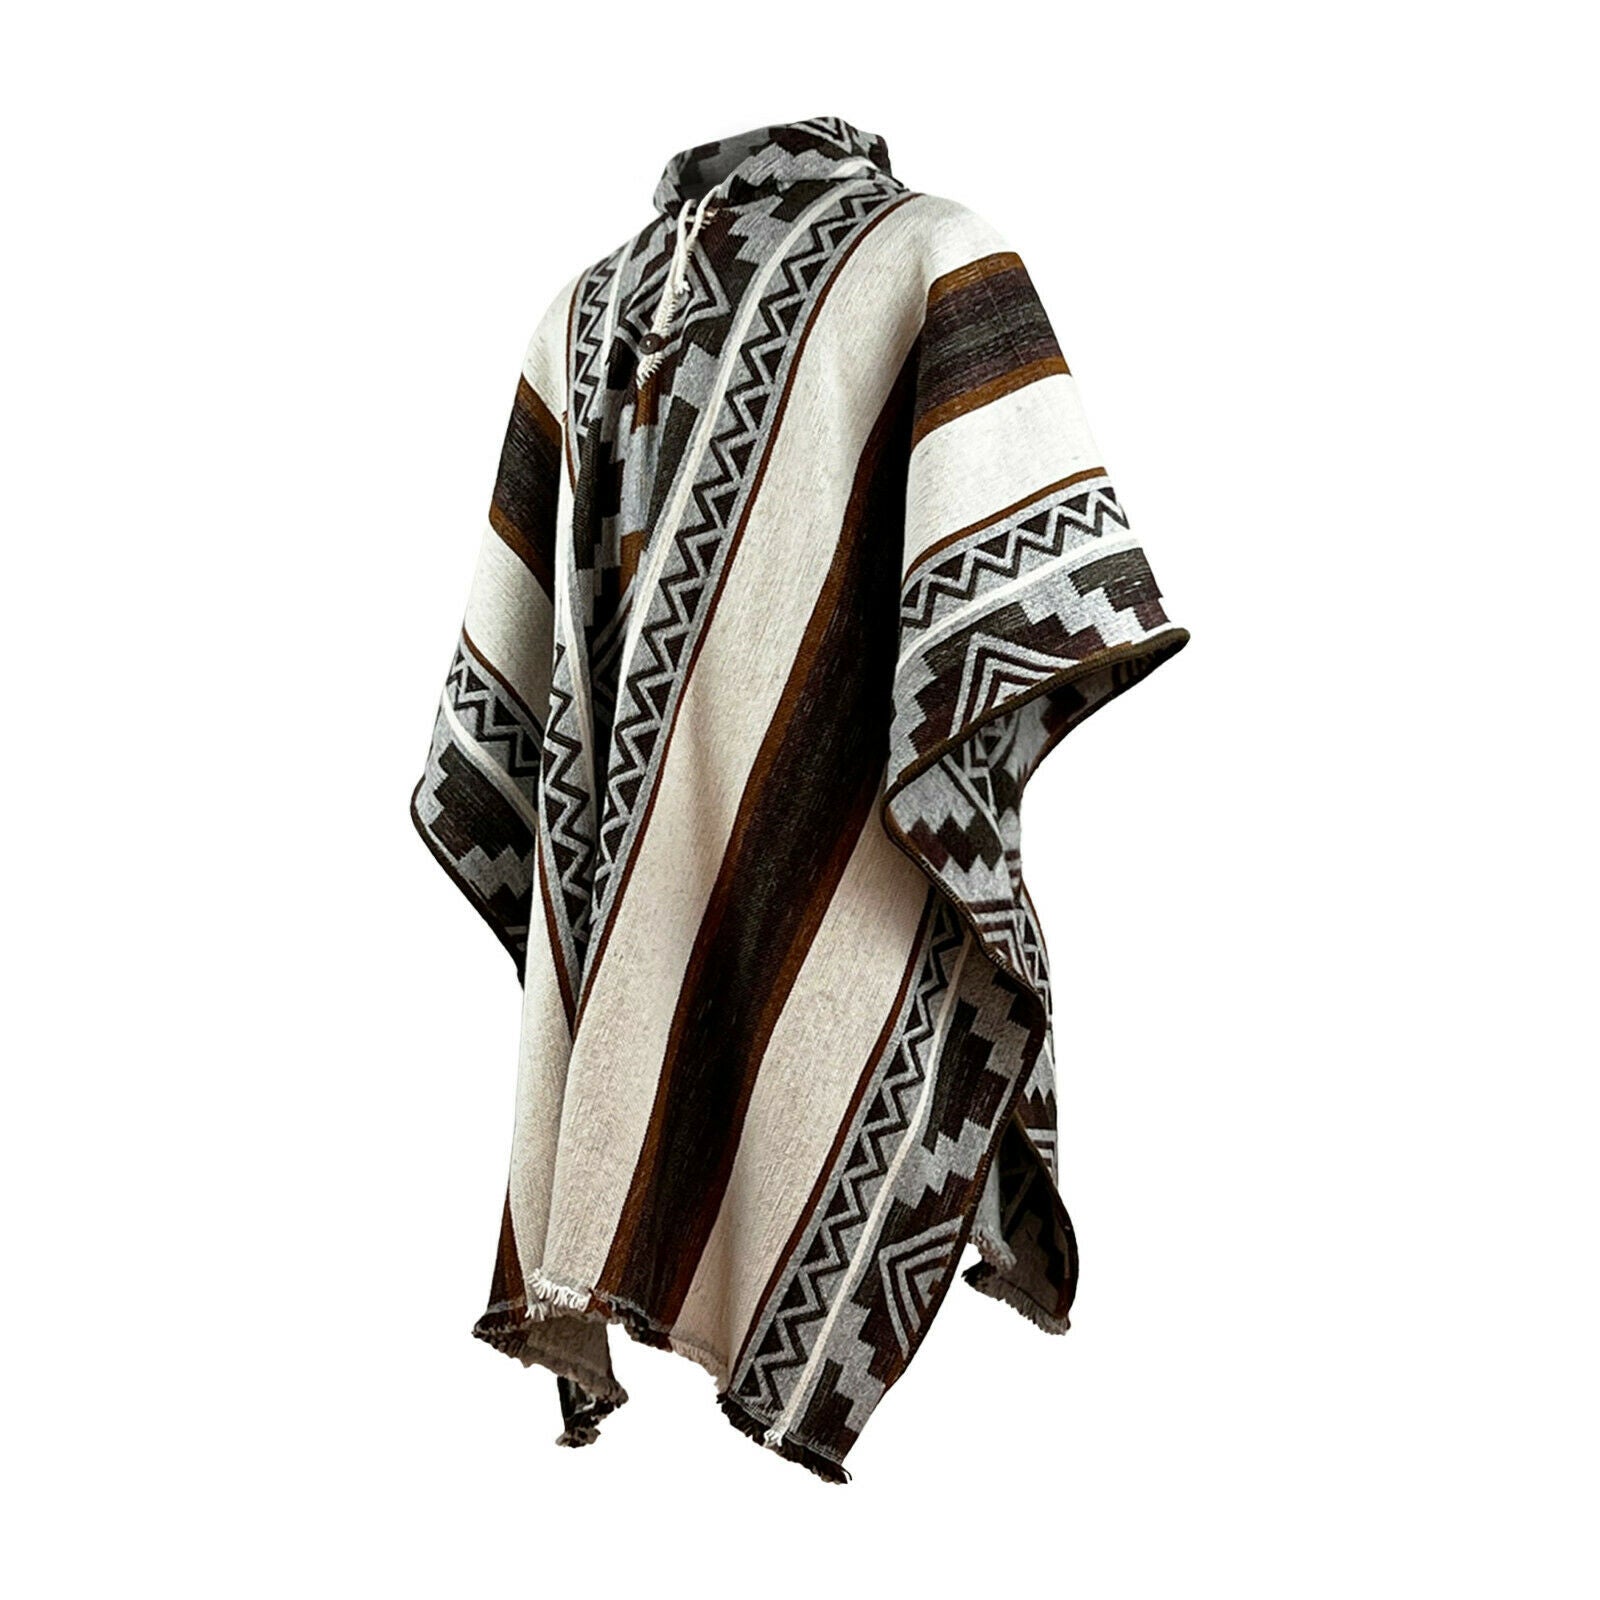 Nunka - Llama Wool Unisex South American Handwoven Thick Hooded Poncho - Andean pattern - natural colours